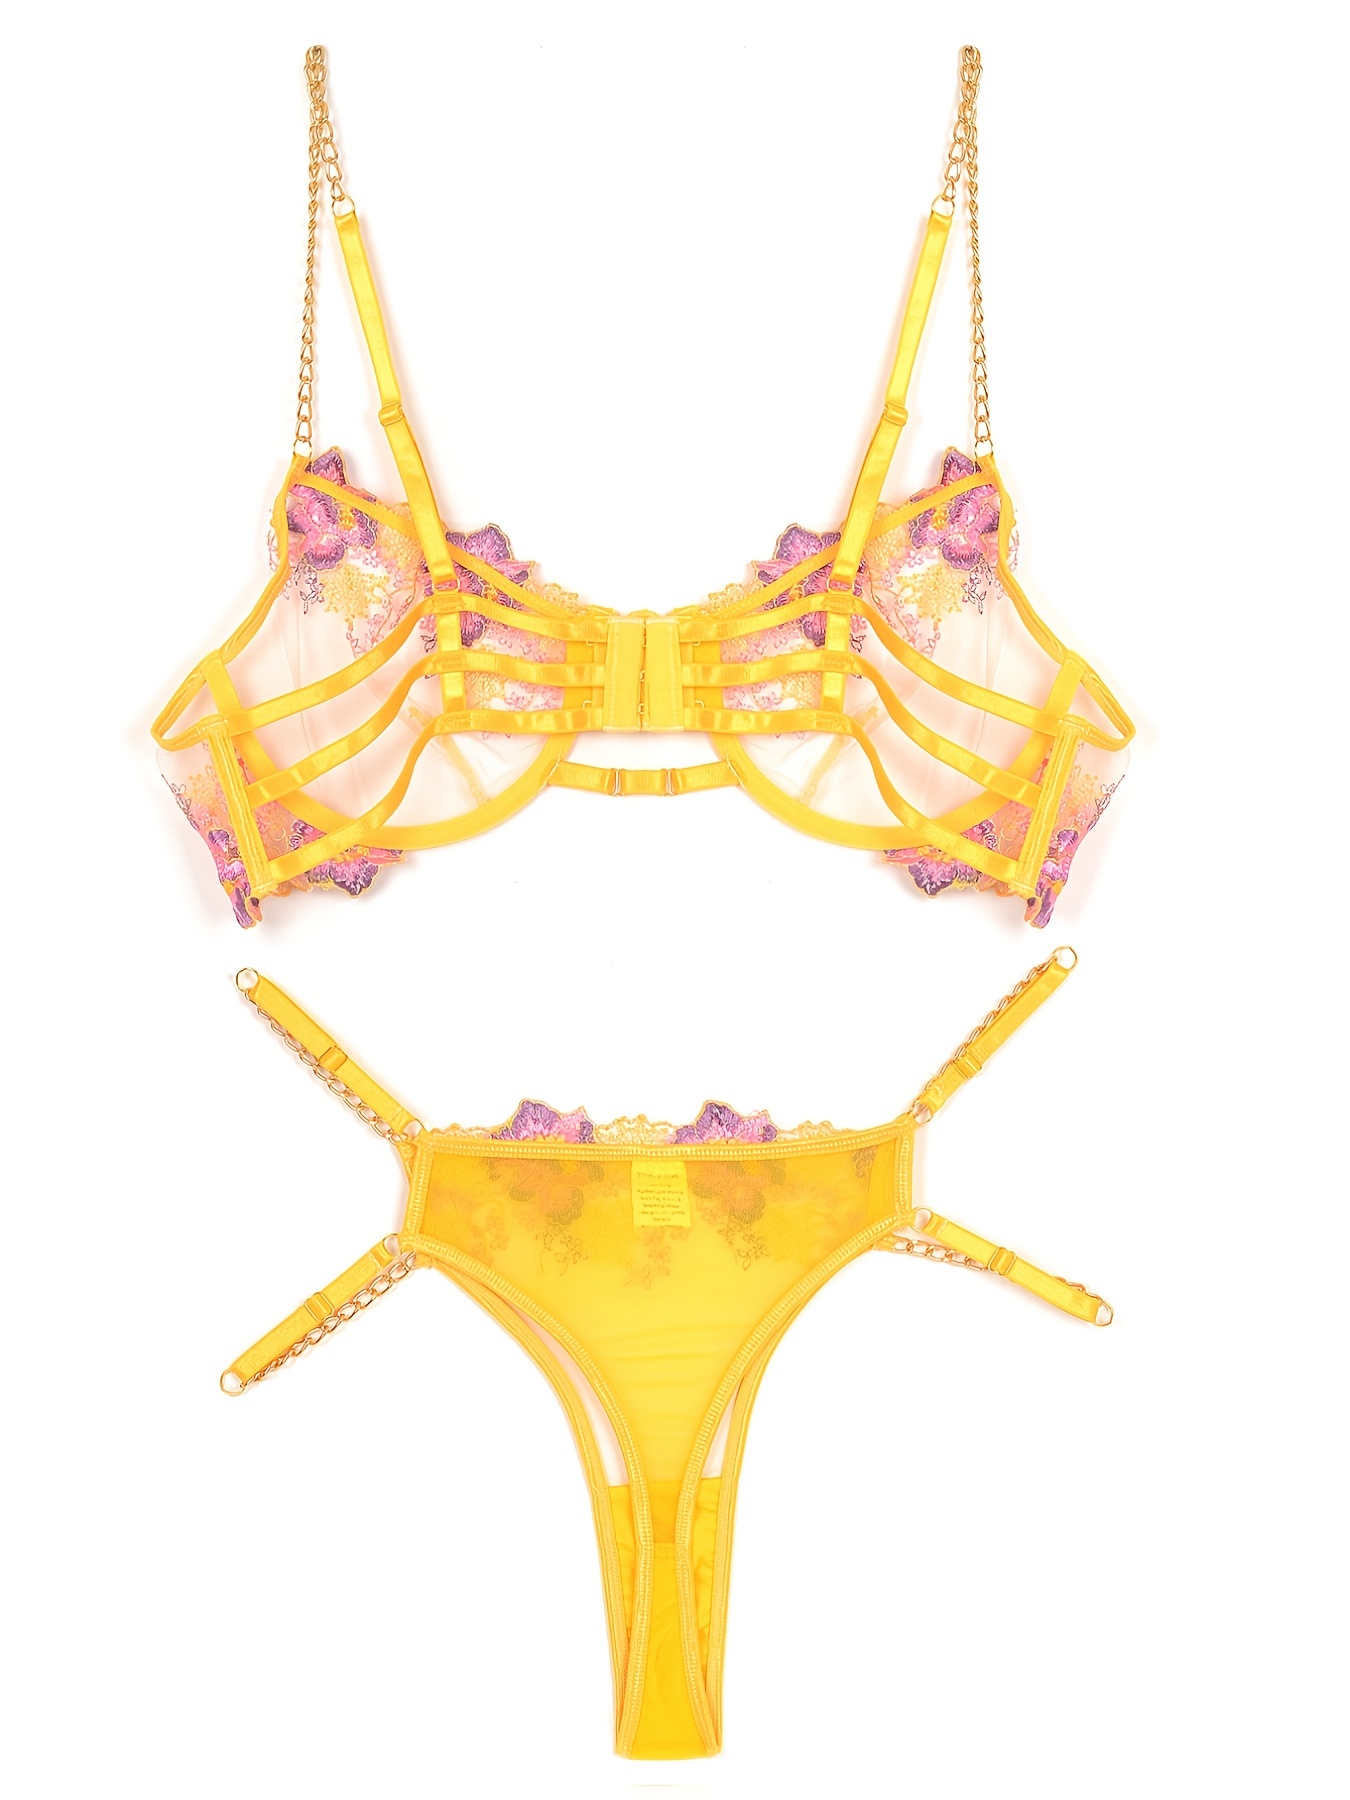 Shining Lemon! Yellow Embroidered Lingerie Bra and Panty Set, Sexy Lin